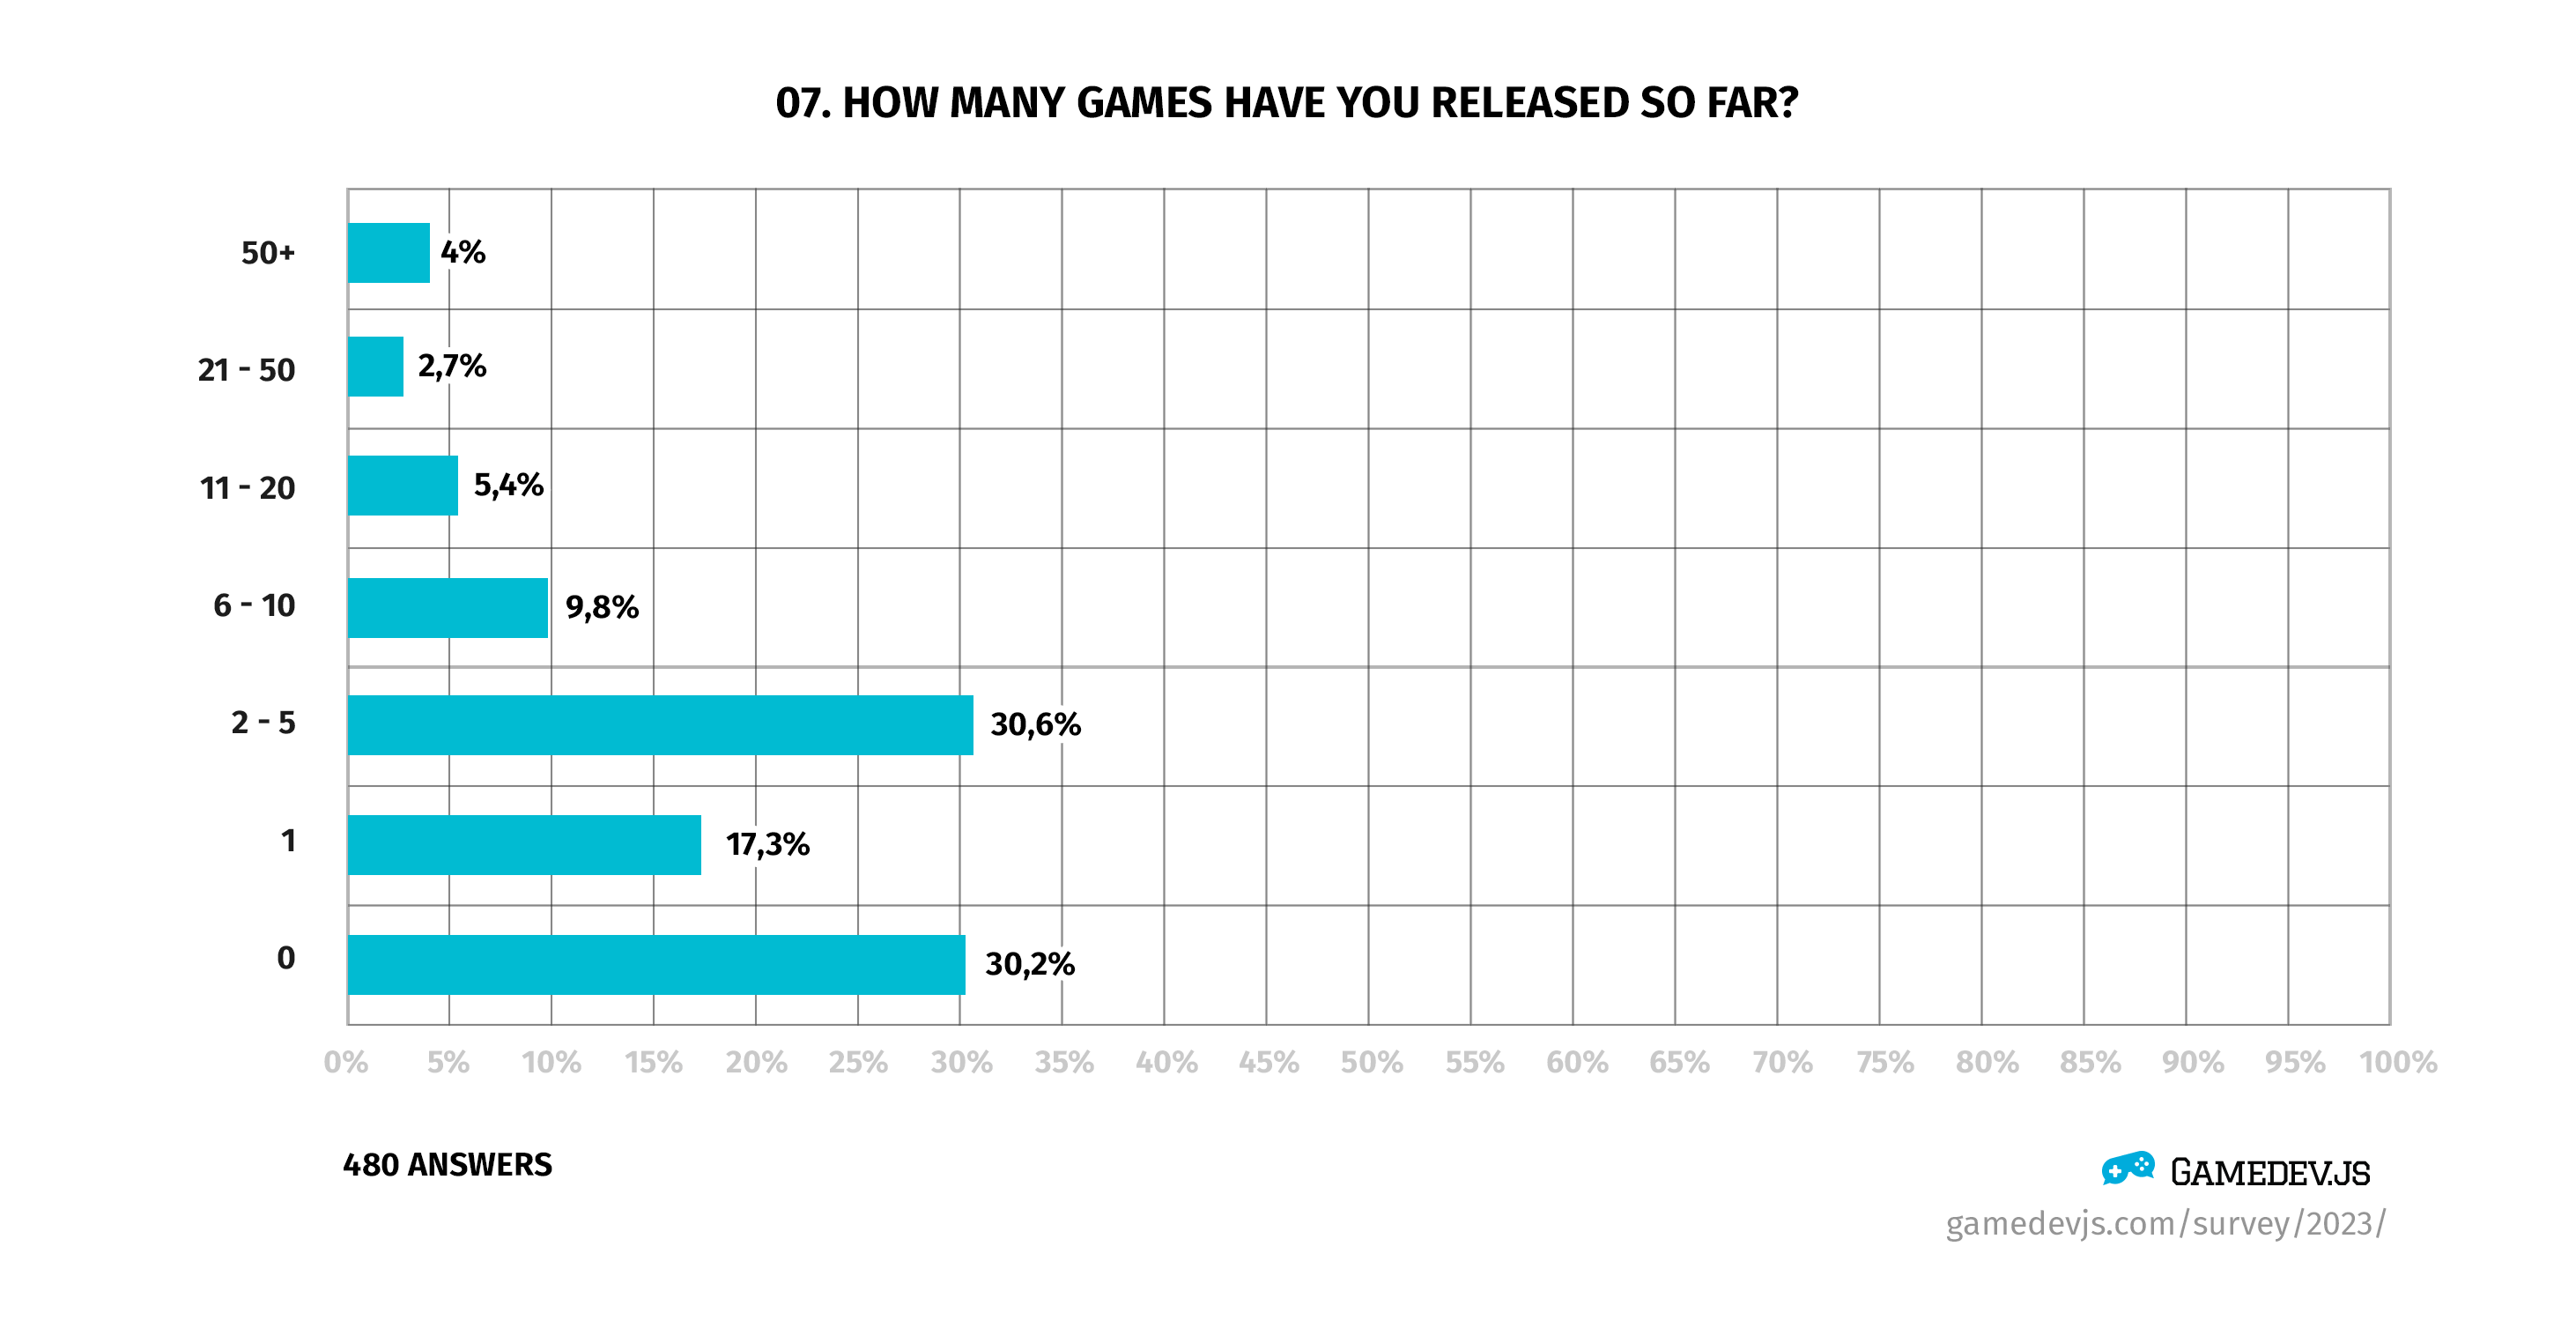 Gamedev.js Survey 2023 - Question #07: How many games have you released so far?